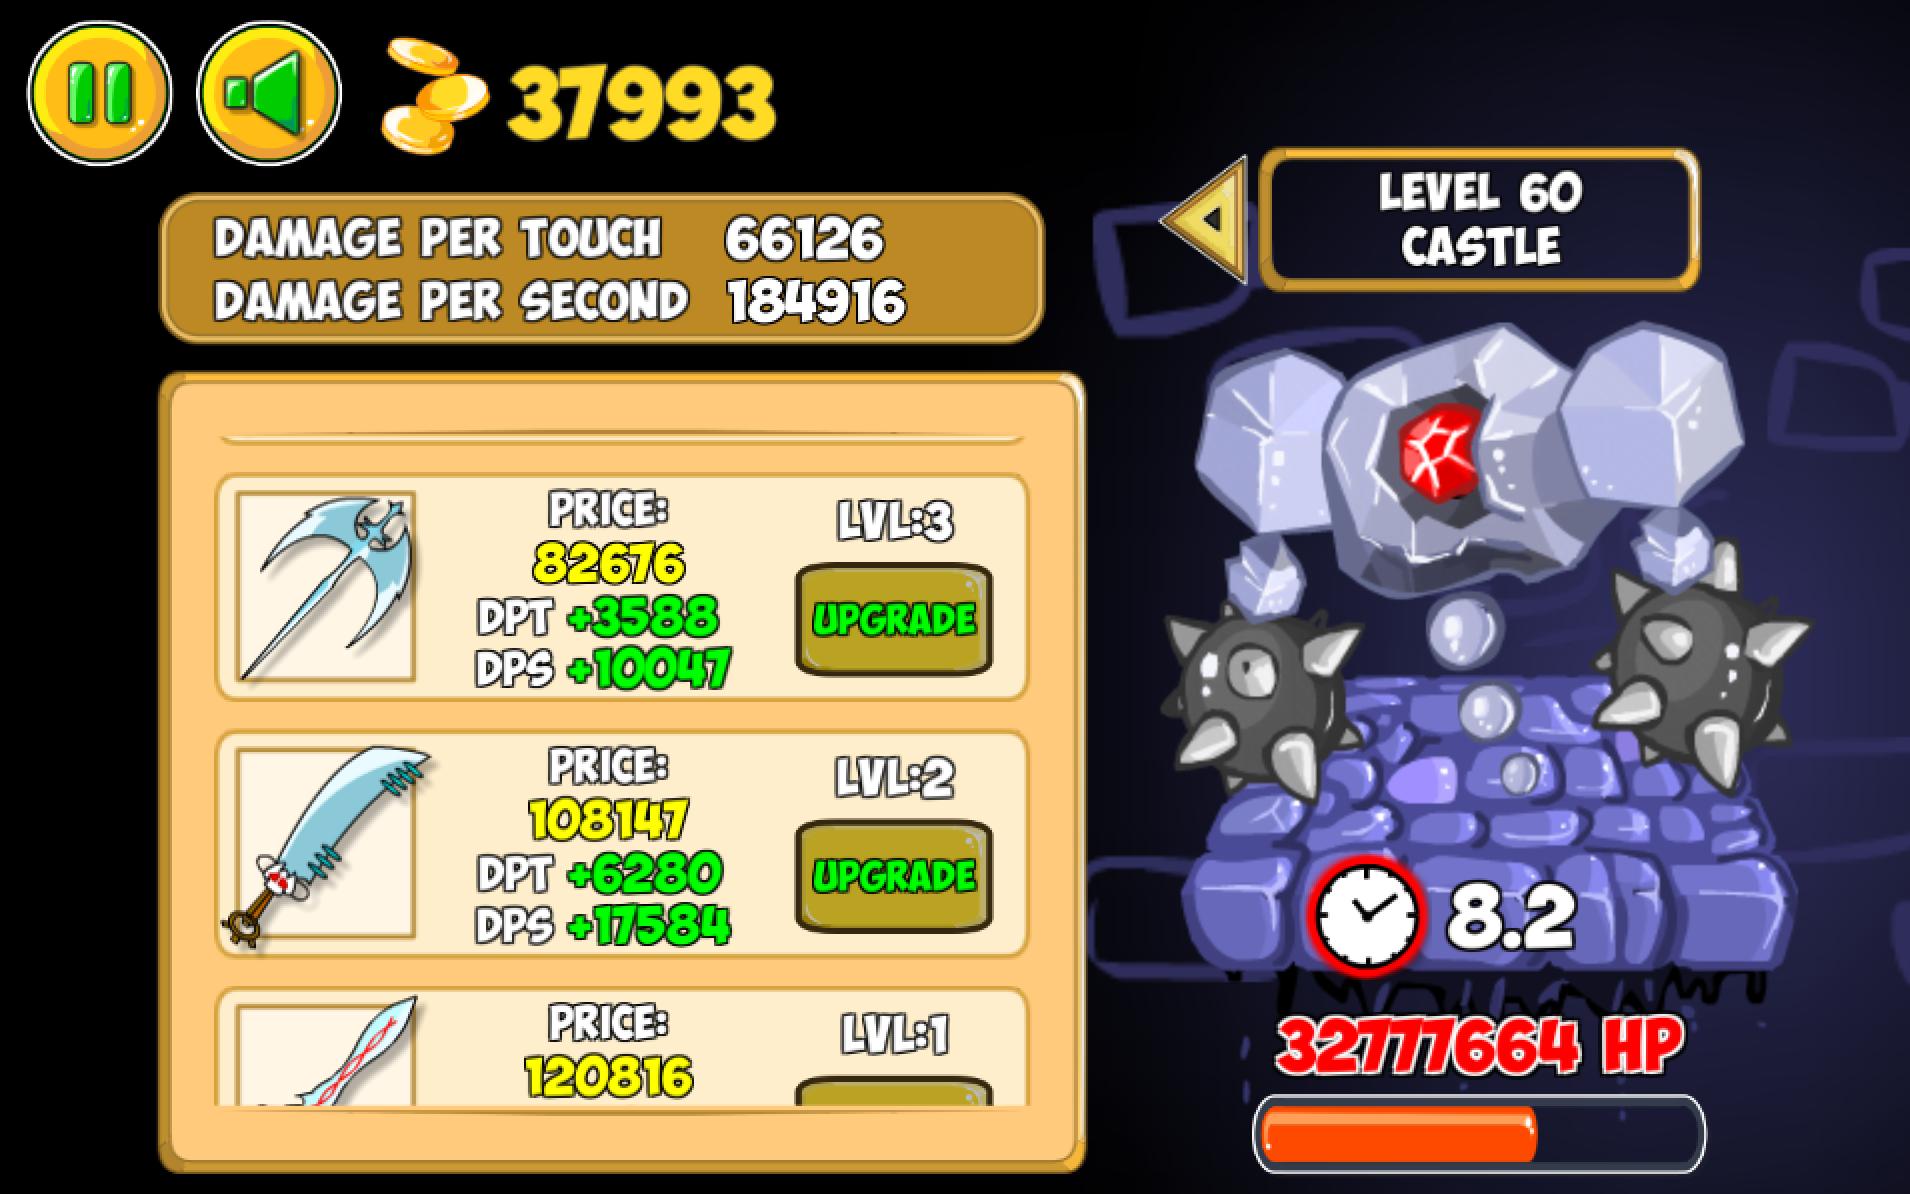 Clicker Monsters for Android - APK Download
